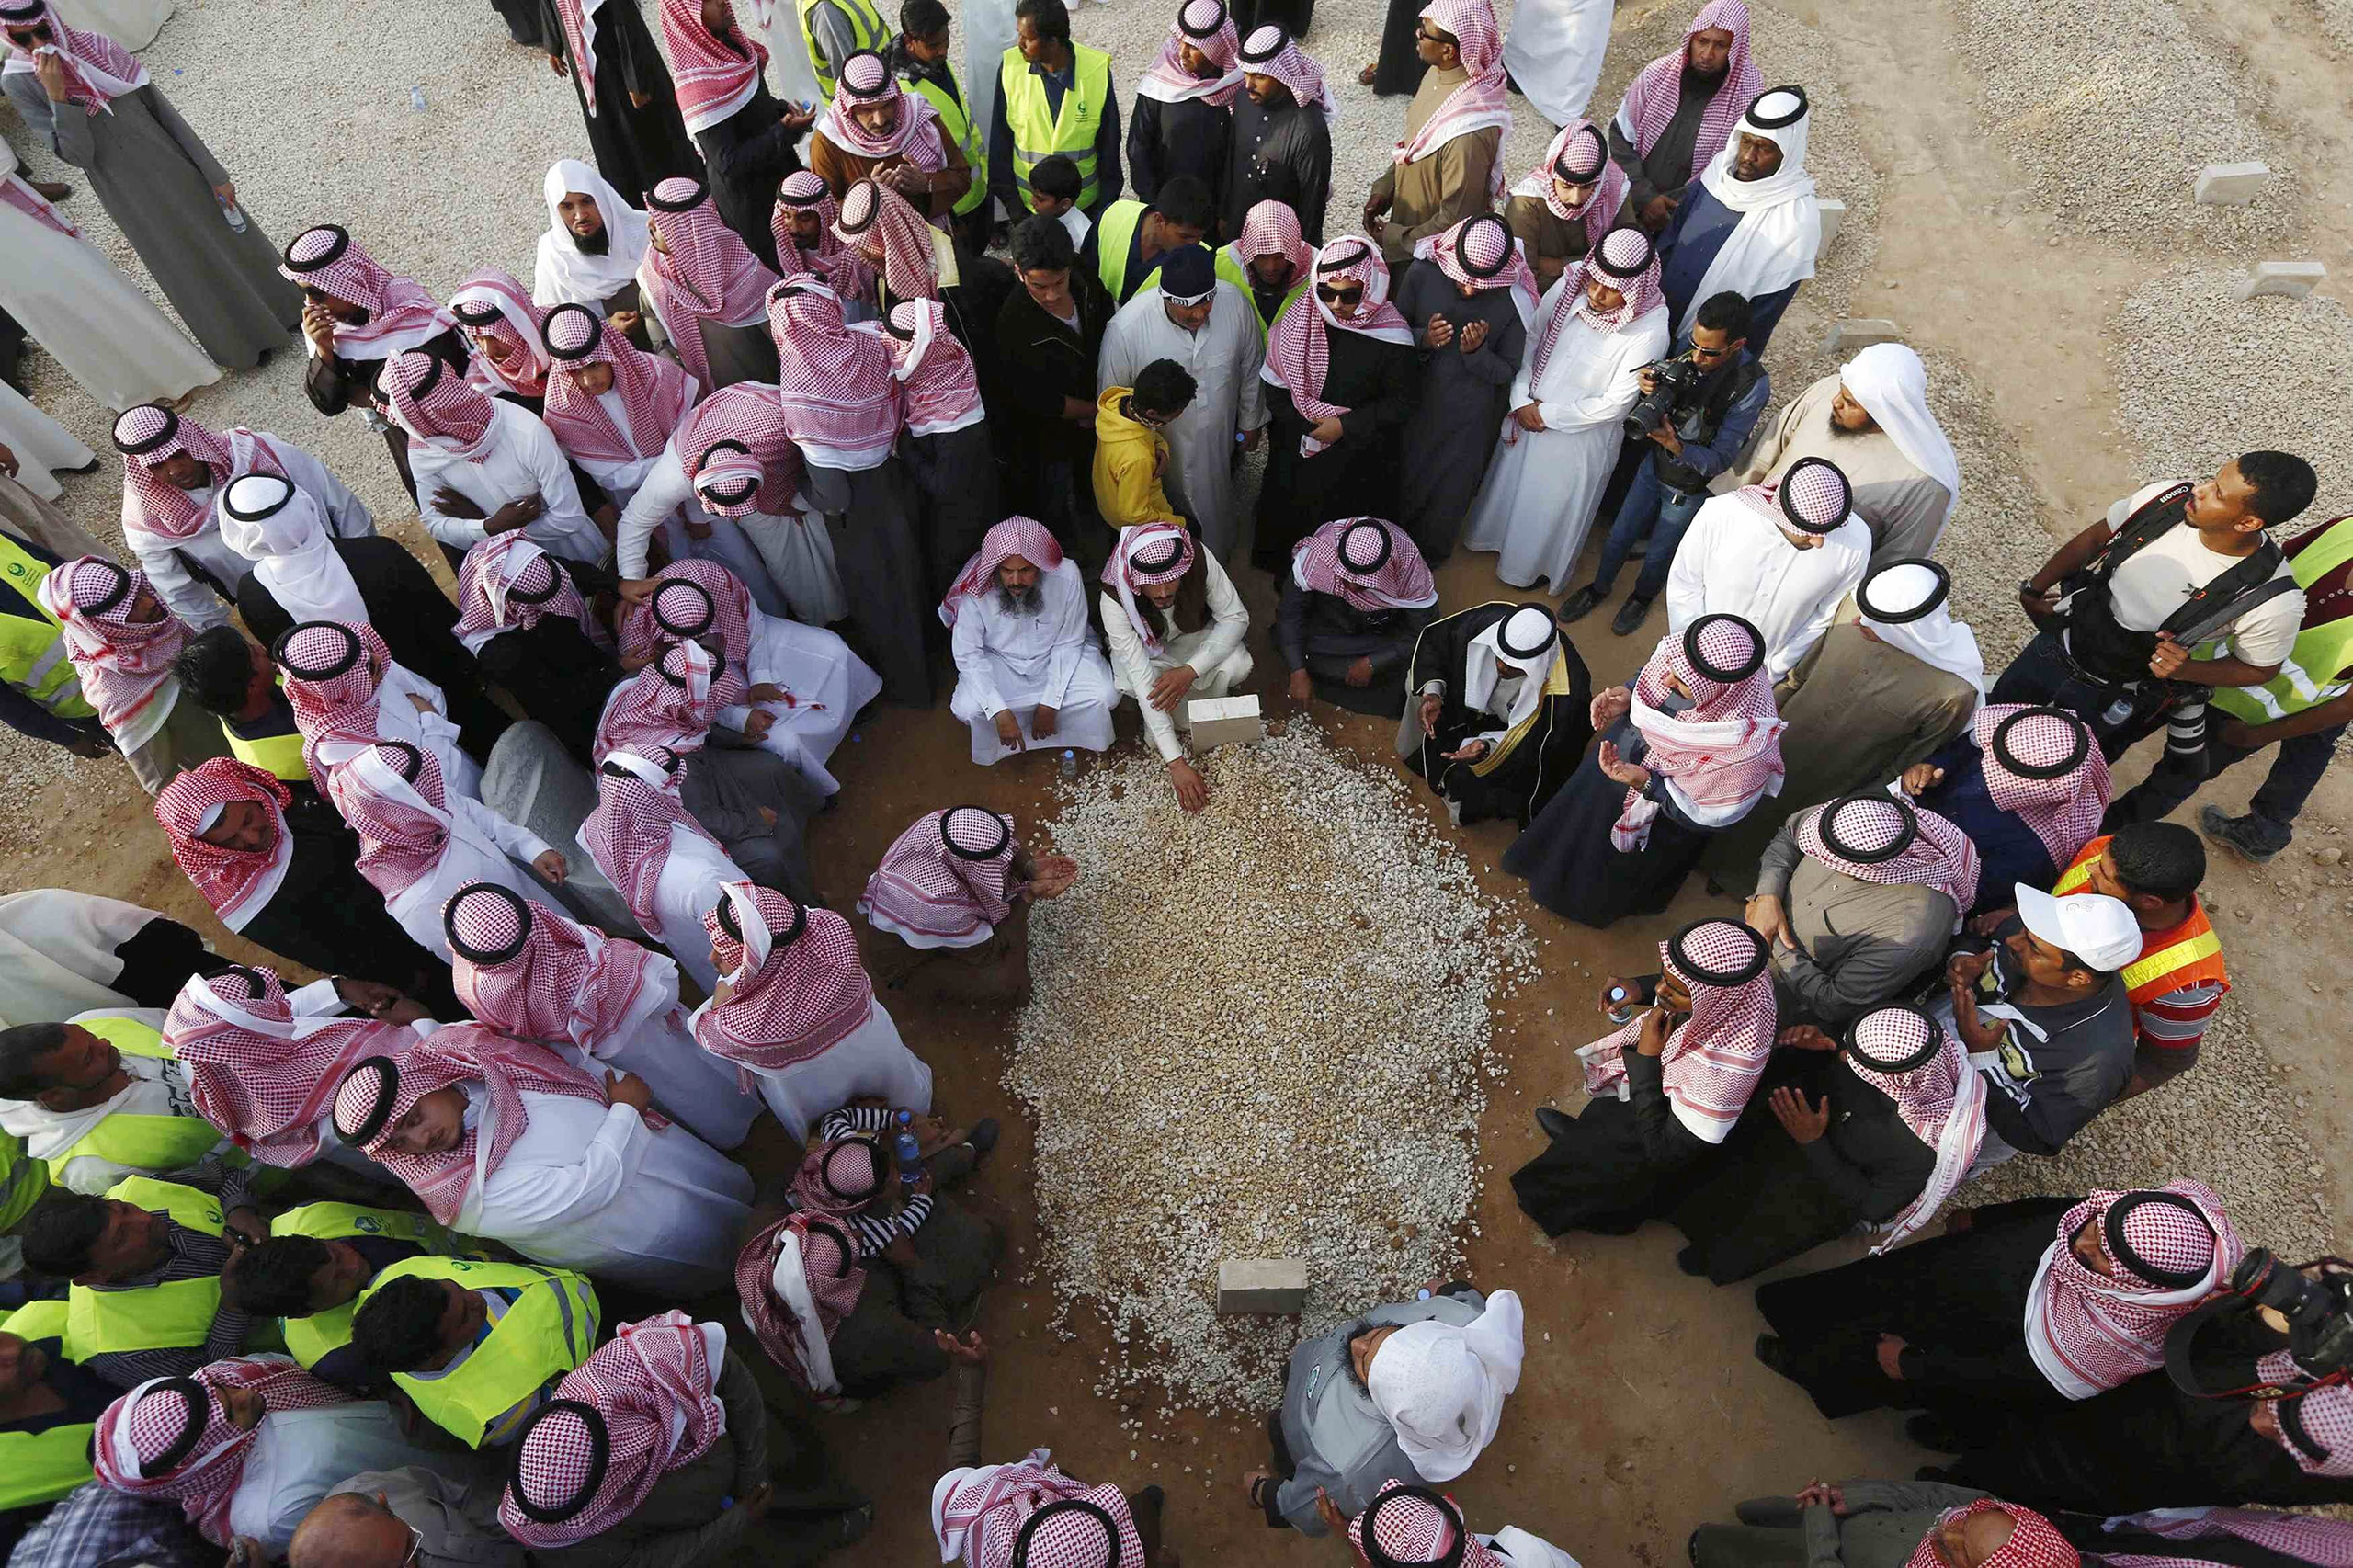 In keeping with tradition, King Abdullah, 90, was buried in an unmarked grave in Riyadh on Jan. 23, after ruling Saudi Arabia for nearly a decade (REUTERS)